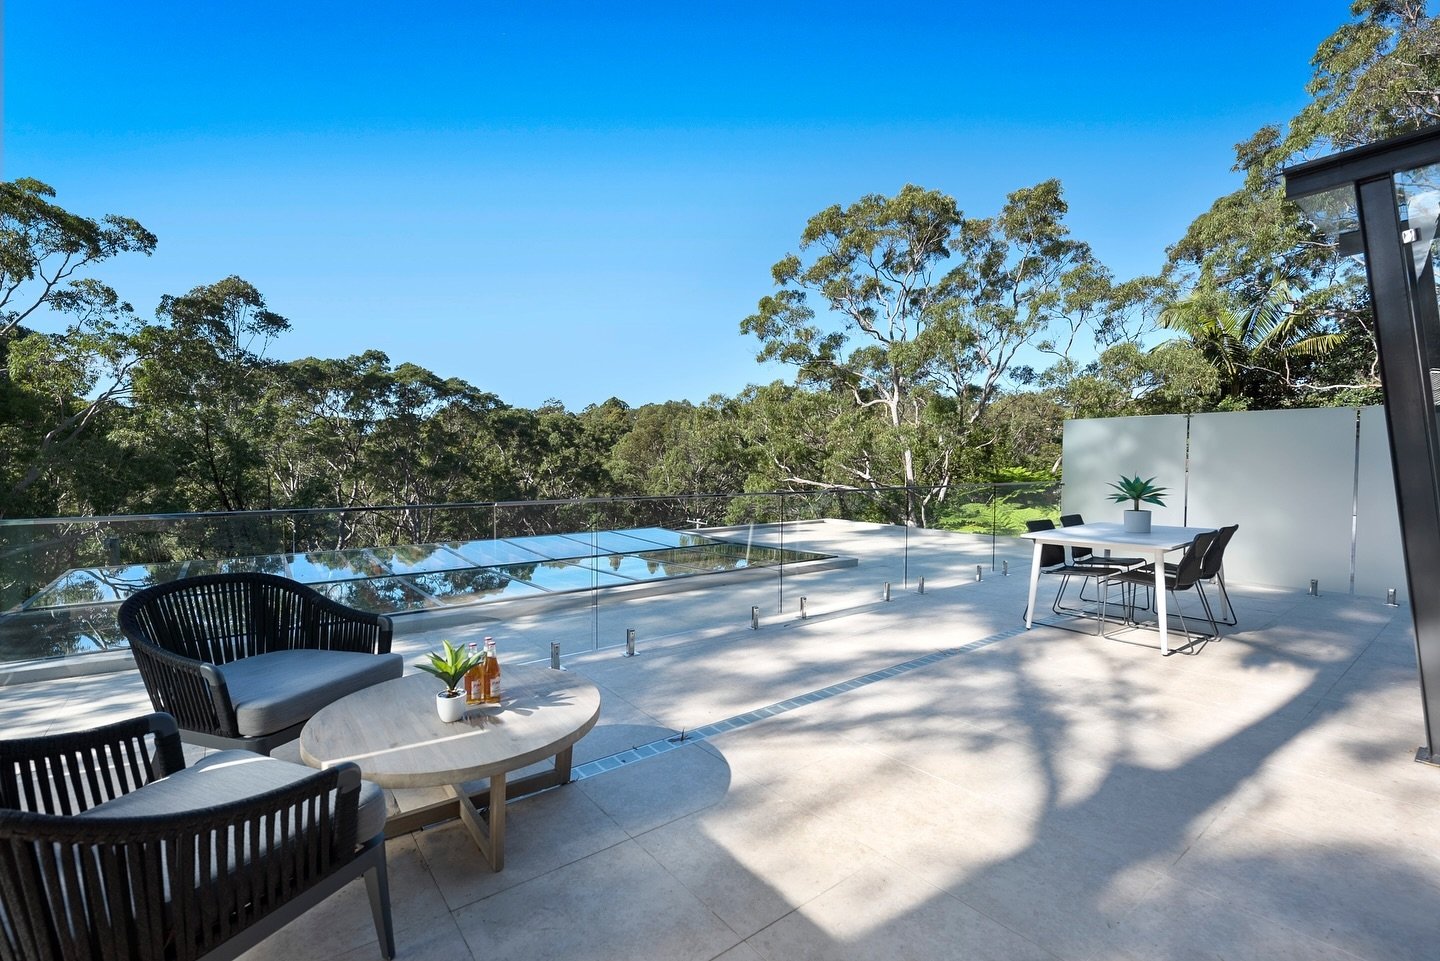 Completed Project | Lane Cove, Sydney

An outdoor space with a sense of calm and seclusion.

.

.

.

.

#schenk #construction #architecture #design #building #interiordesigner #renovations #home #builder #photography #luxuryhomes #balcony #privacy #